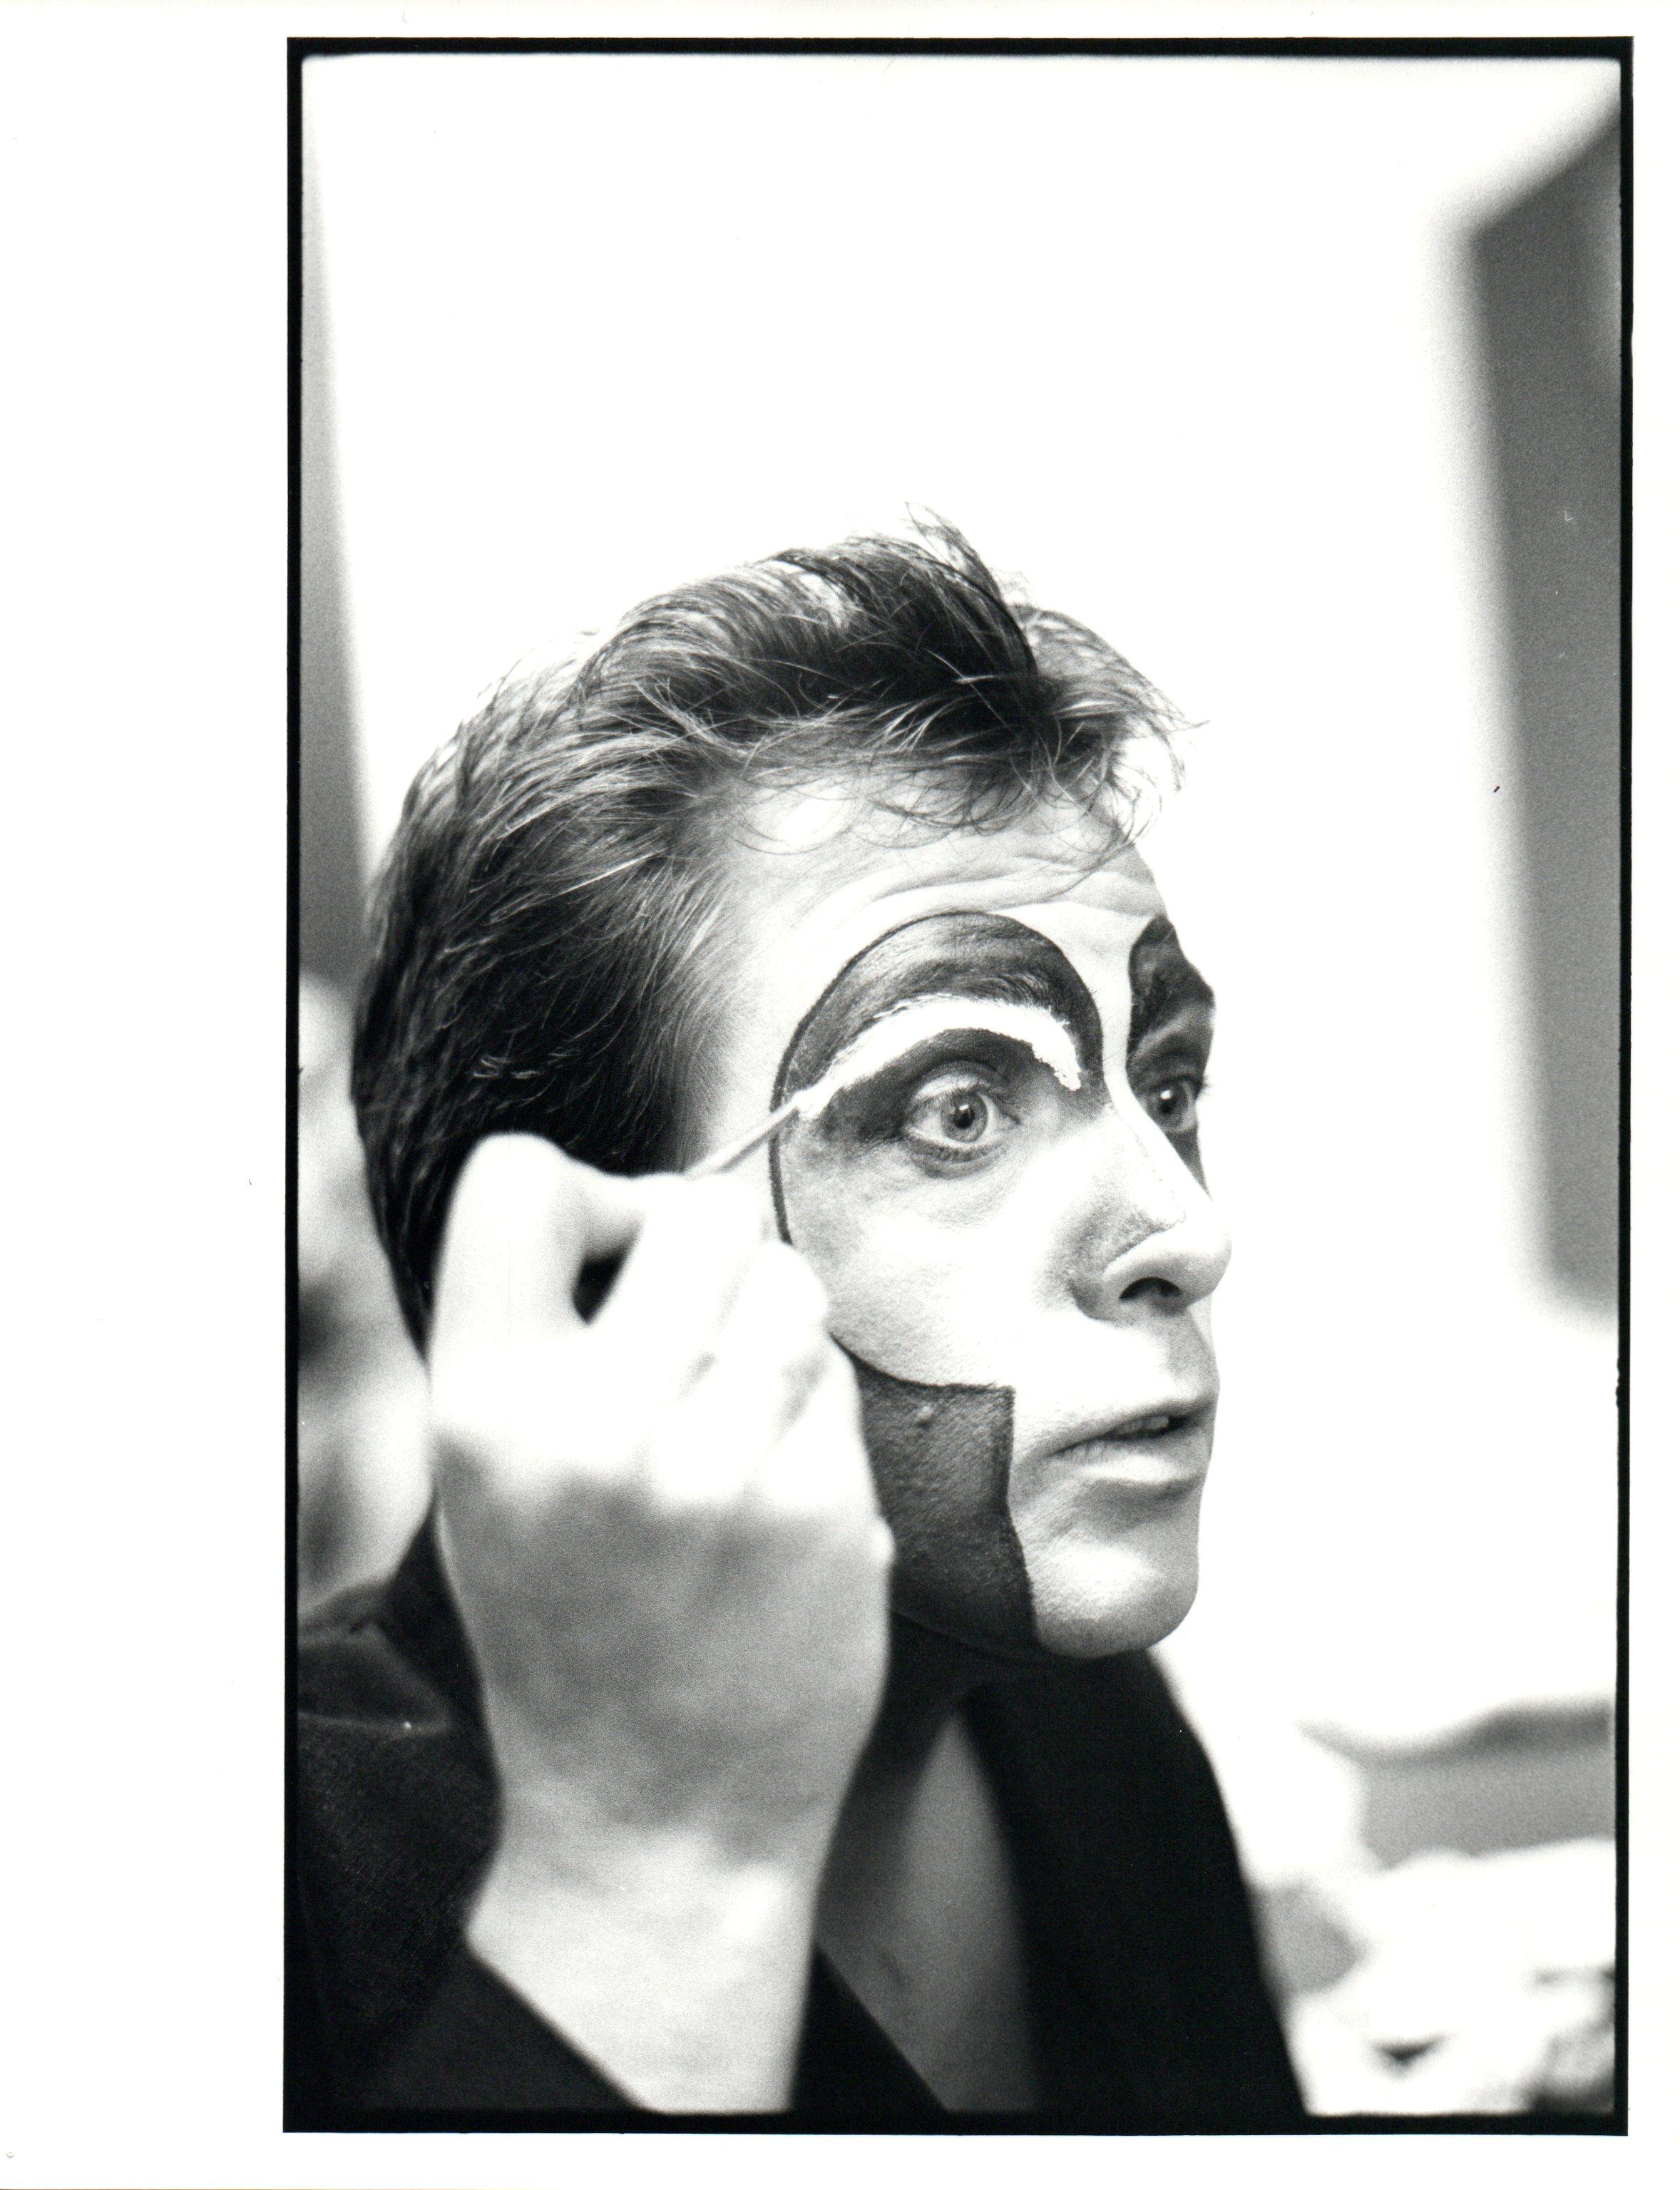 Unknown Black and White Photograph - Peter Gabriel Painting His Face in Mirror Vintage Original Photograph